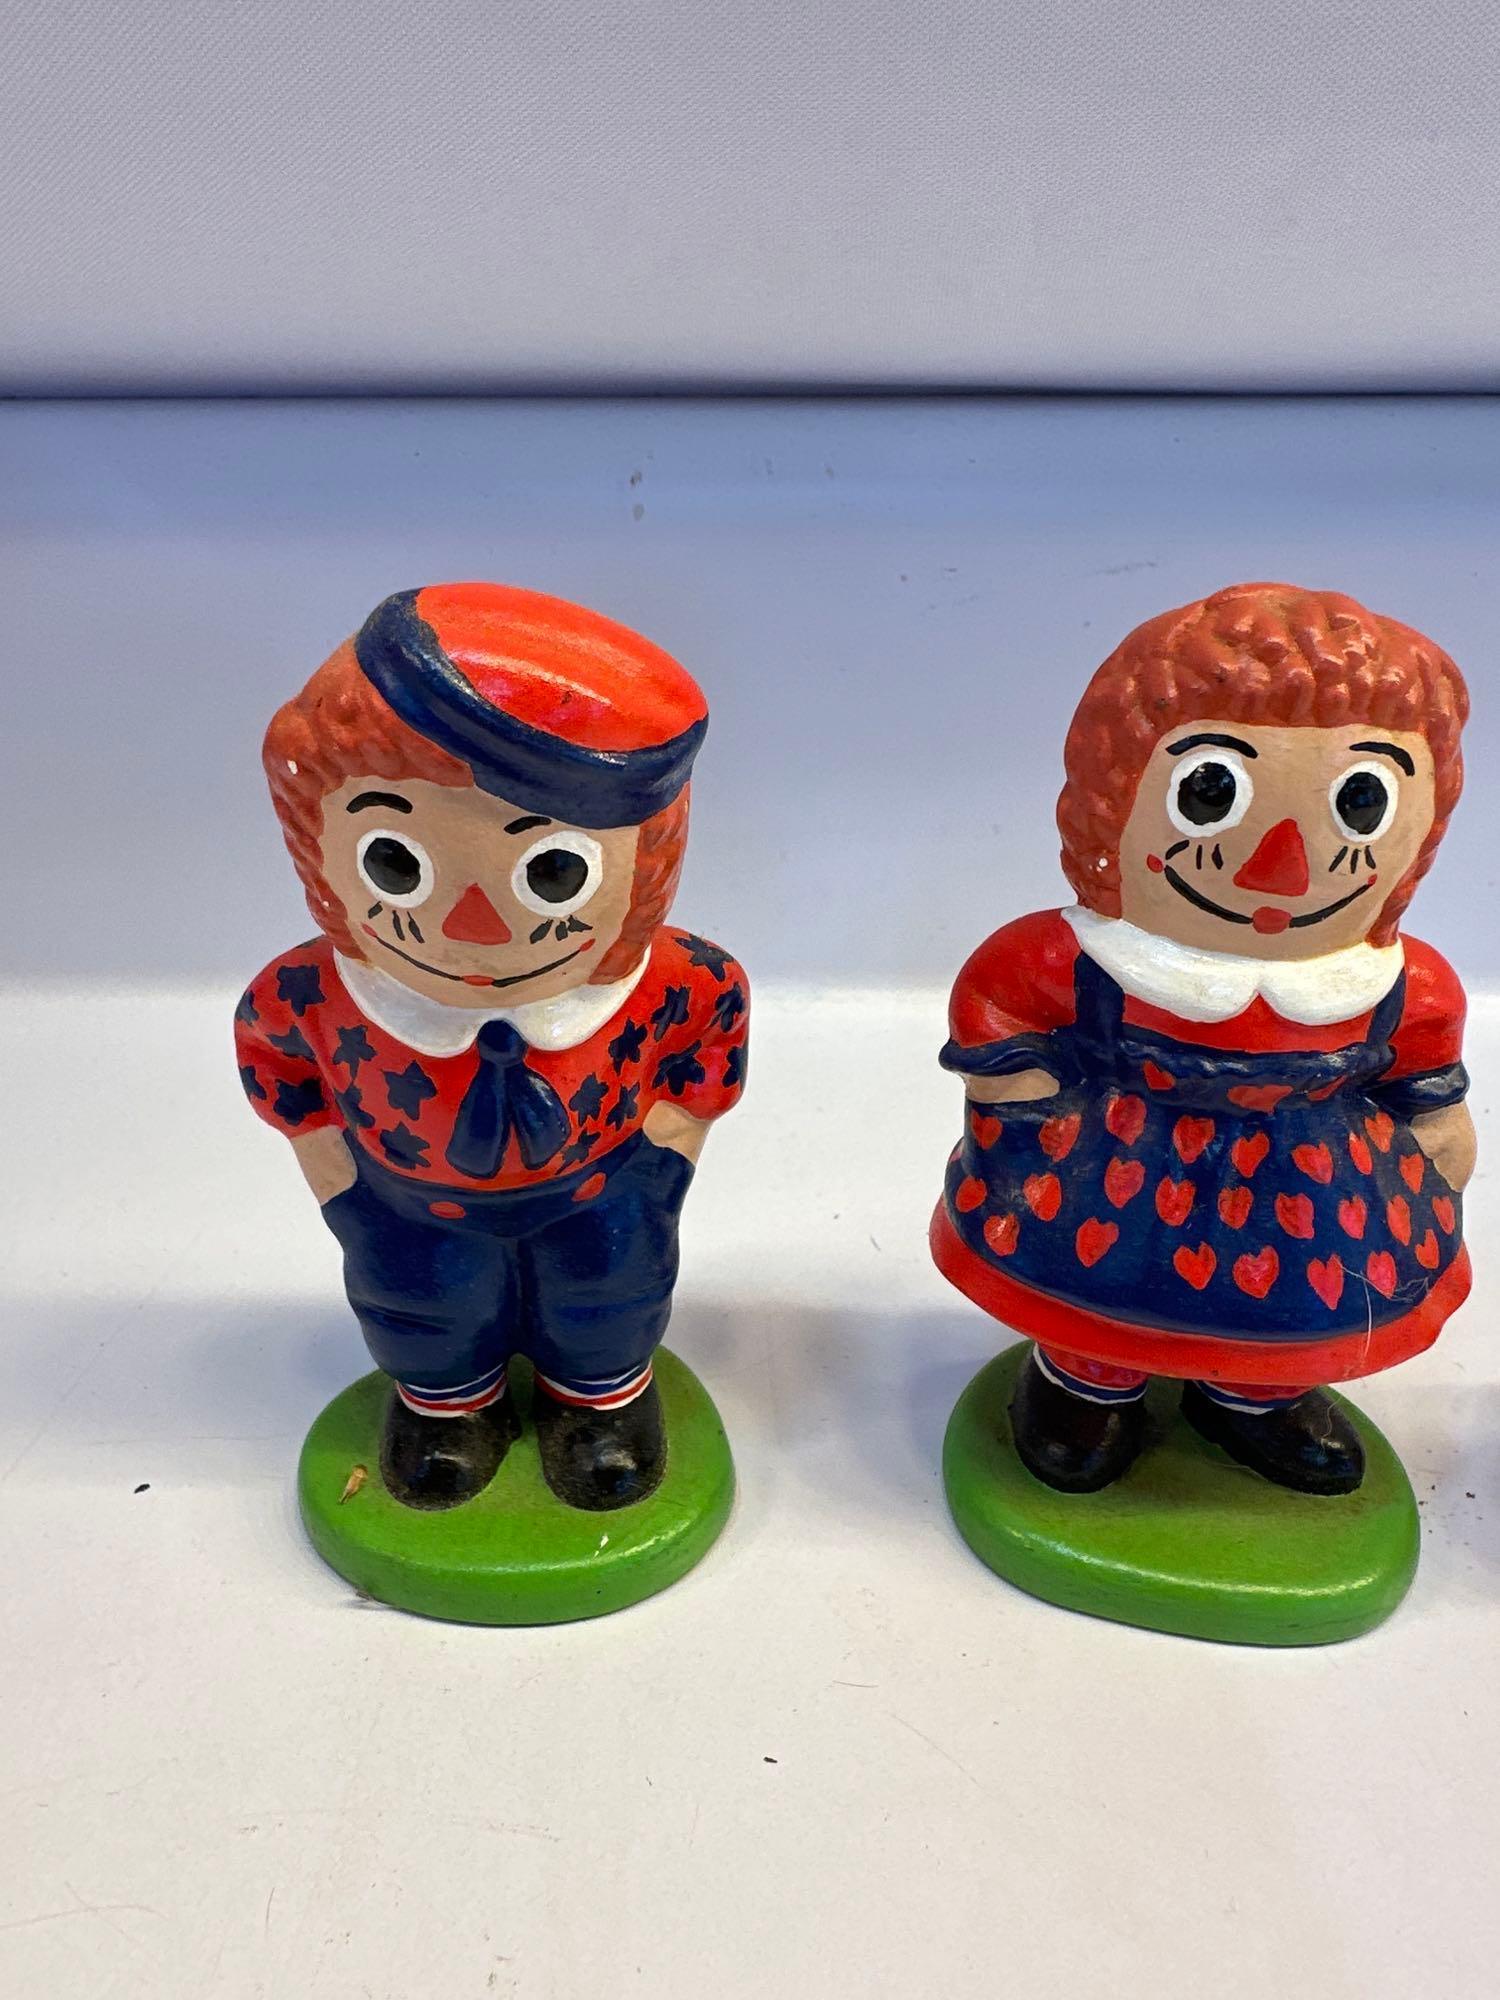 Raggedy Ann And Andy Porcelain Figuines/ Garfield / Raisin Figure